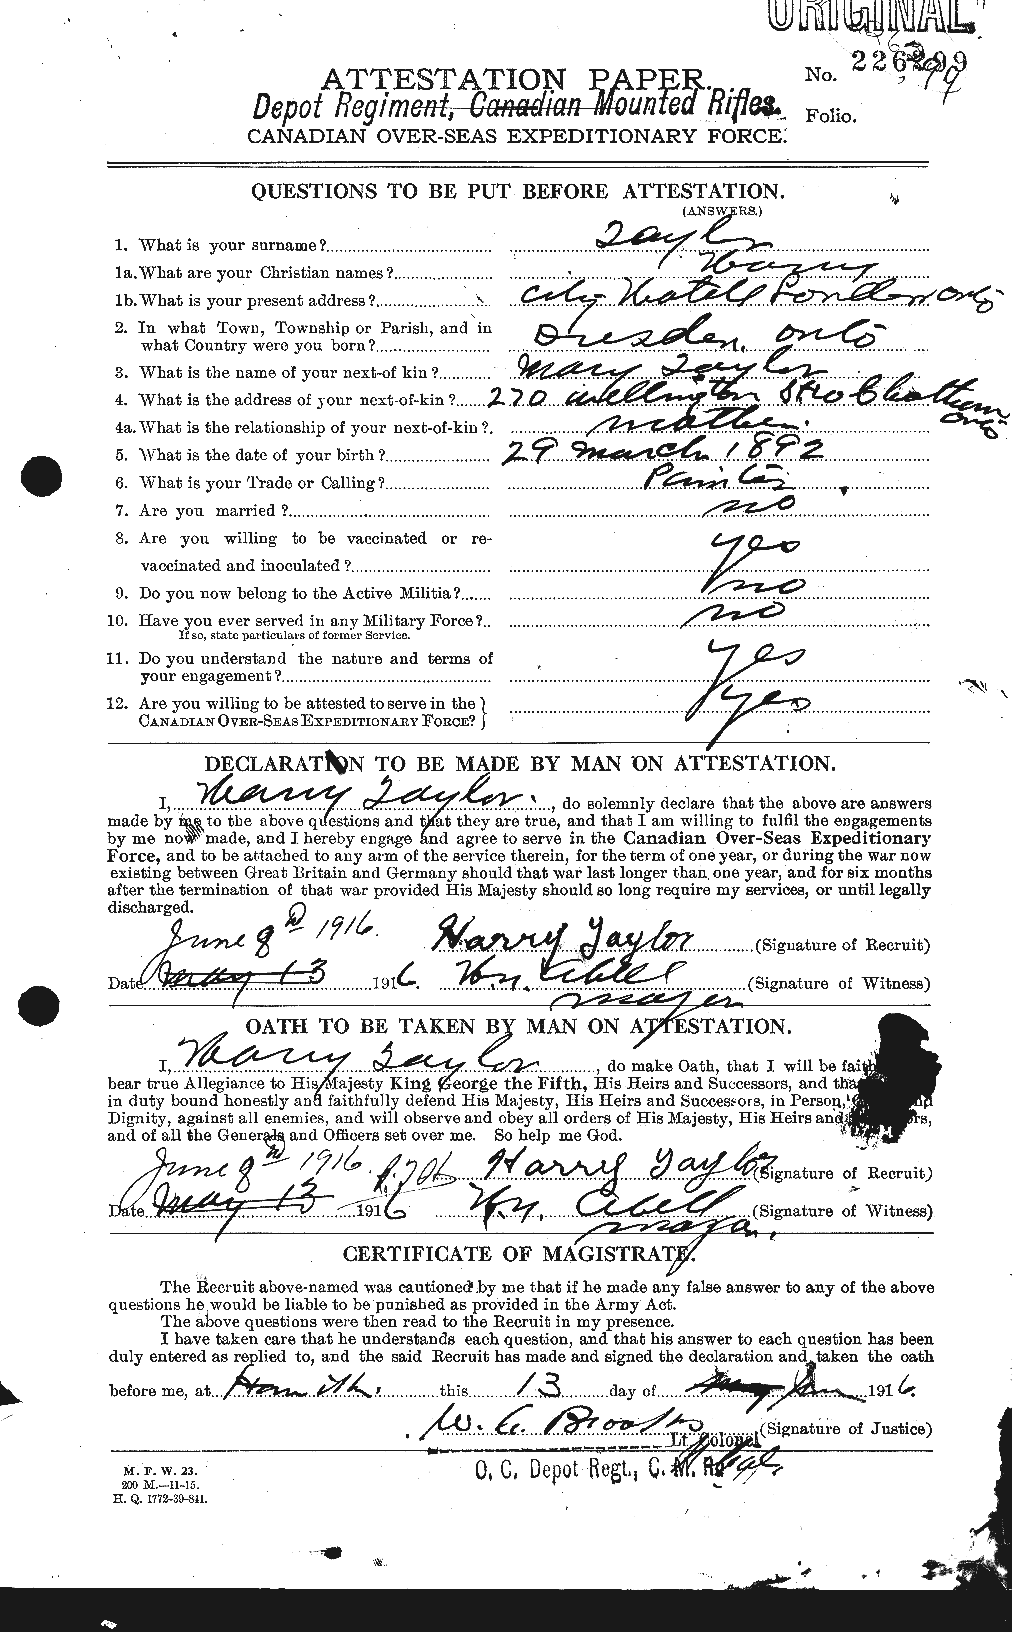 Personnel Records of the First World War - CEF 626470a